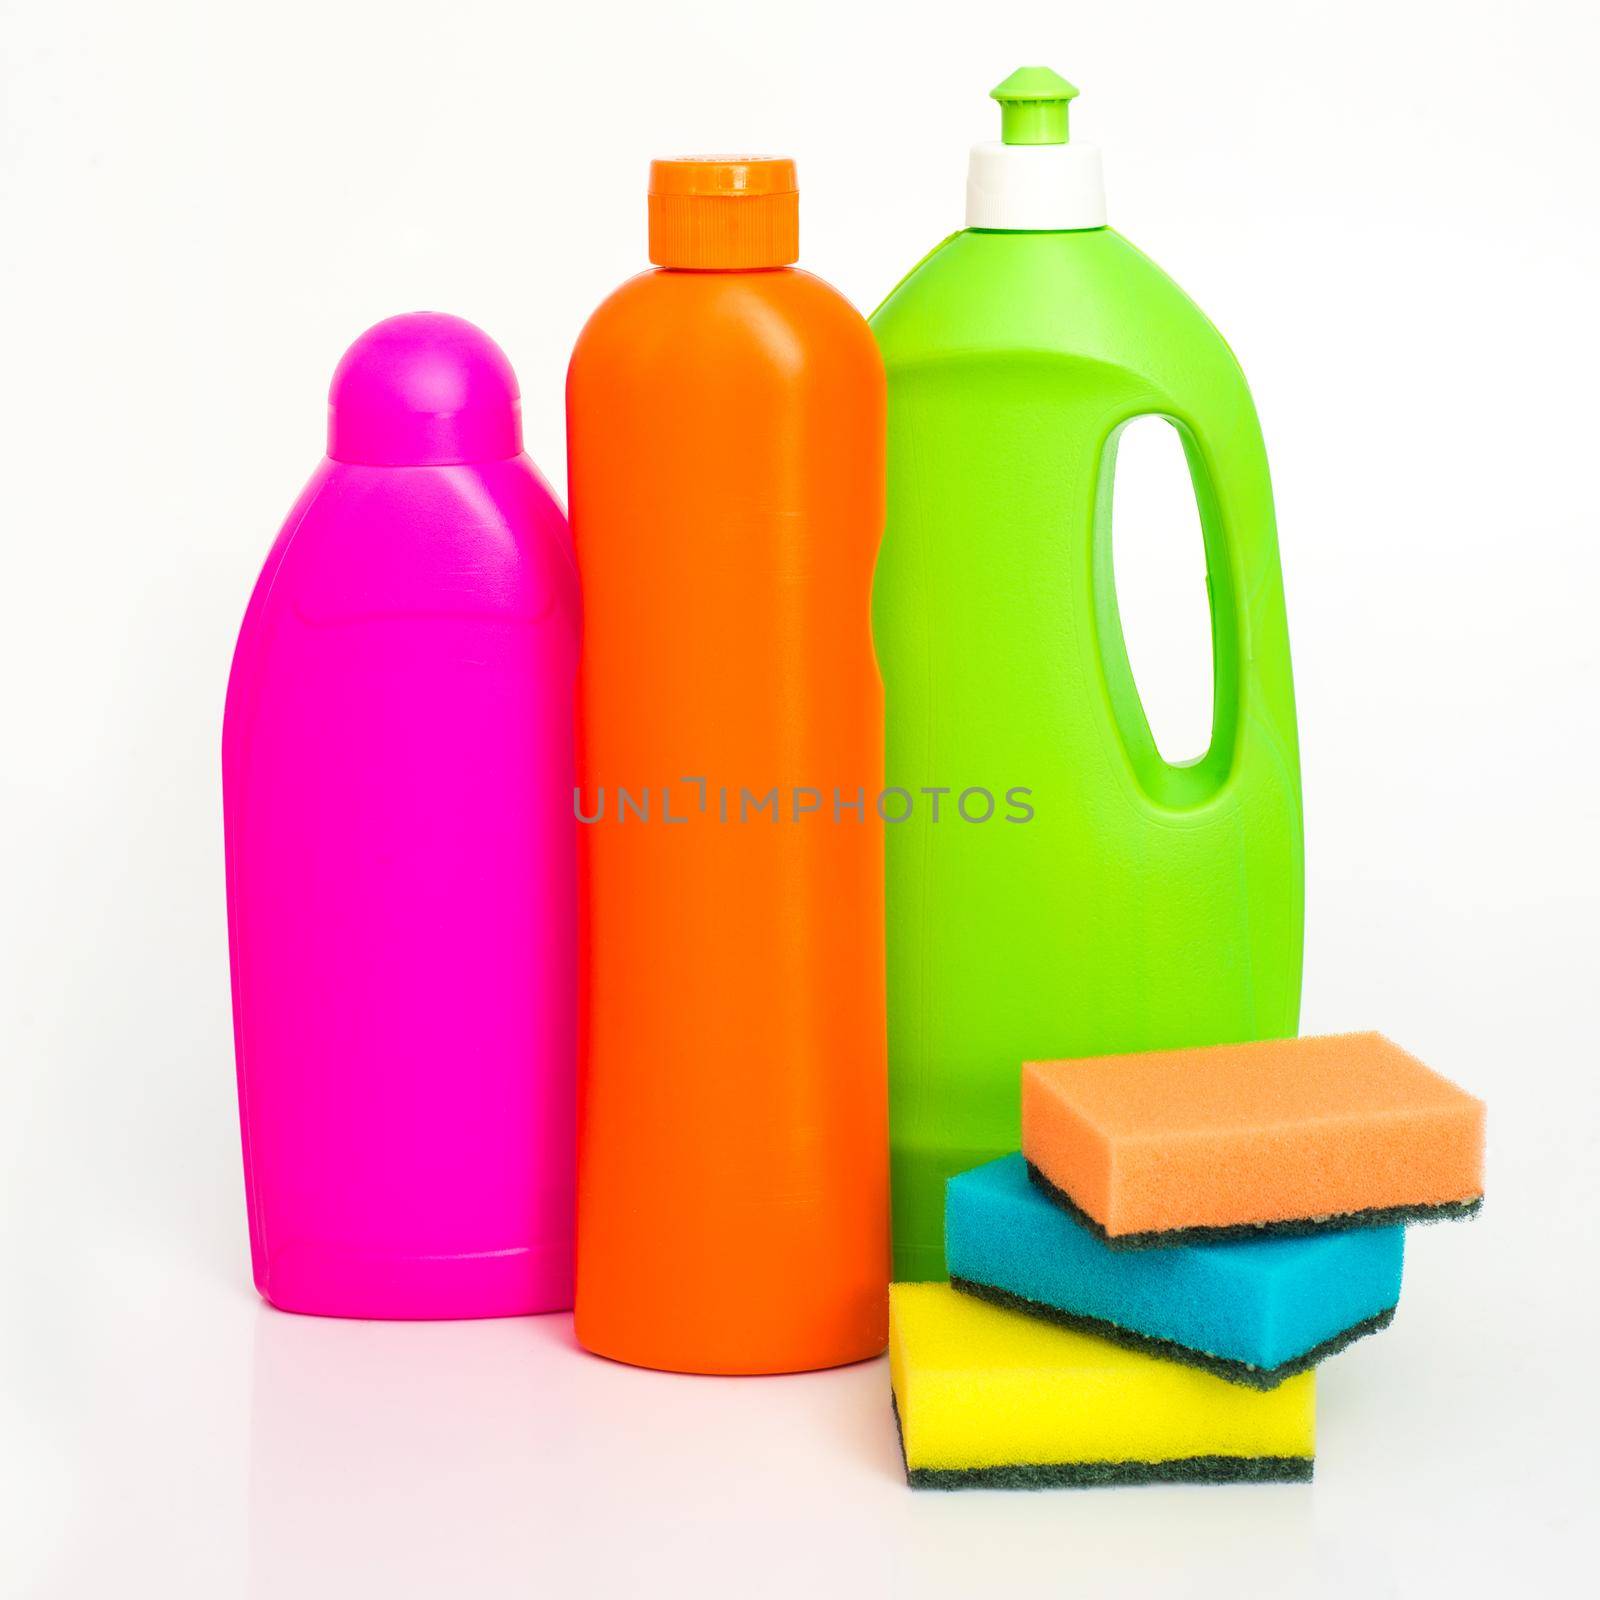 cleaning supplies and sponges isolated on white background